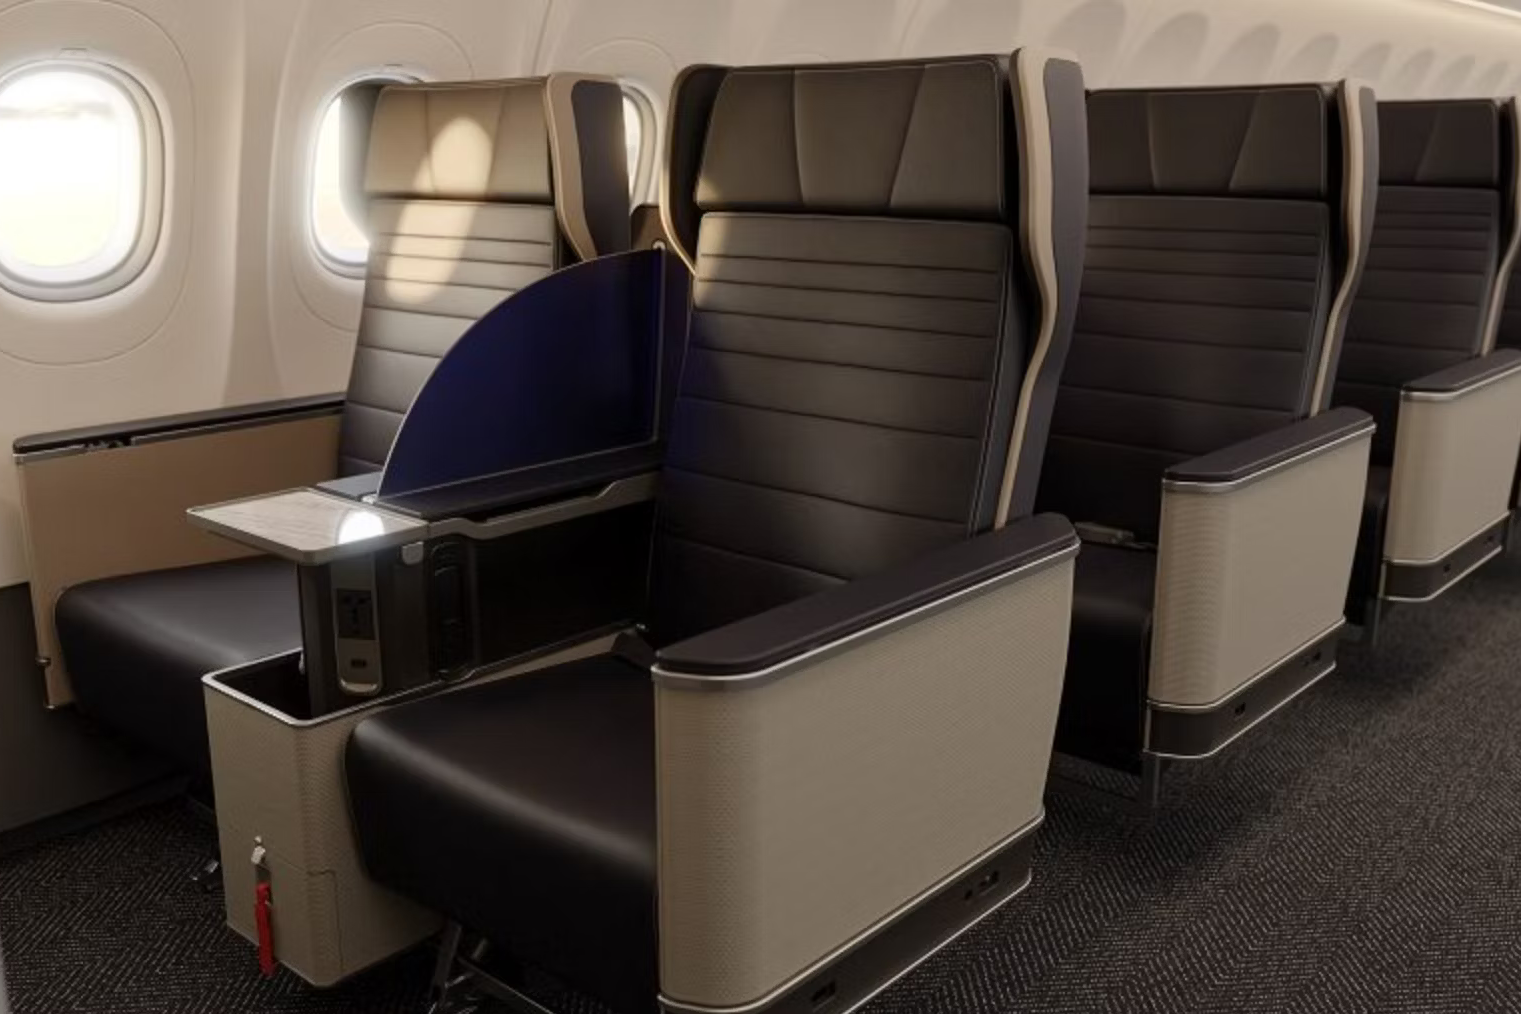 A Render of United's new domestic first class cabin.